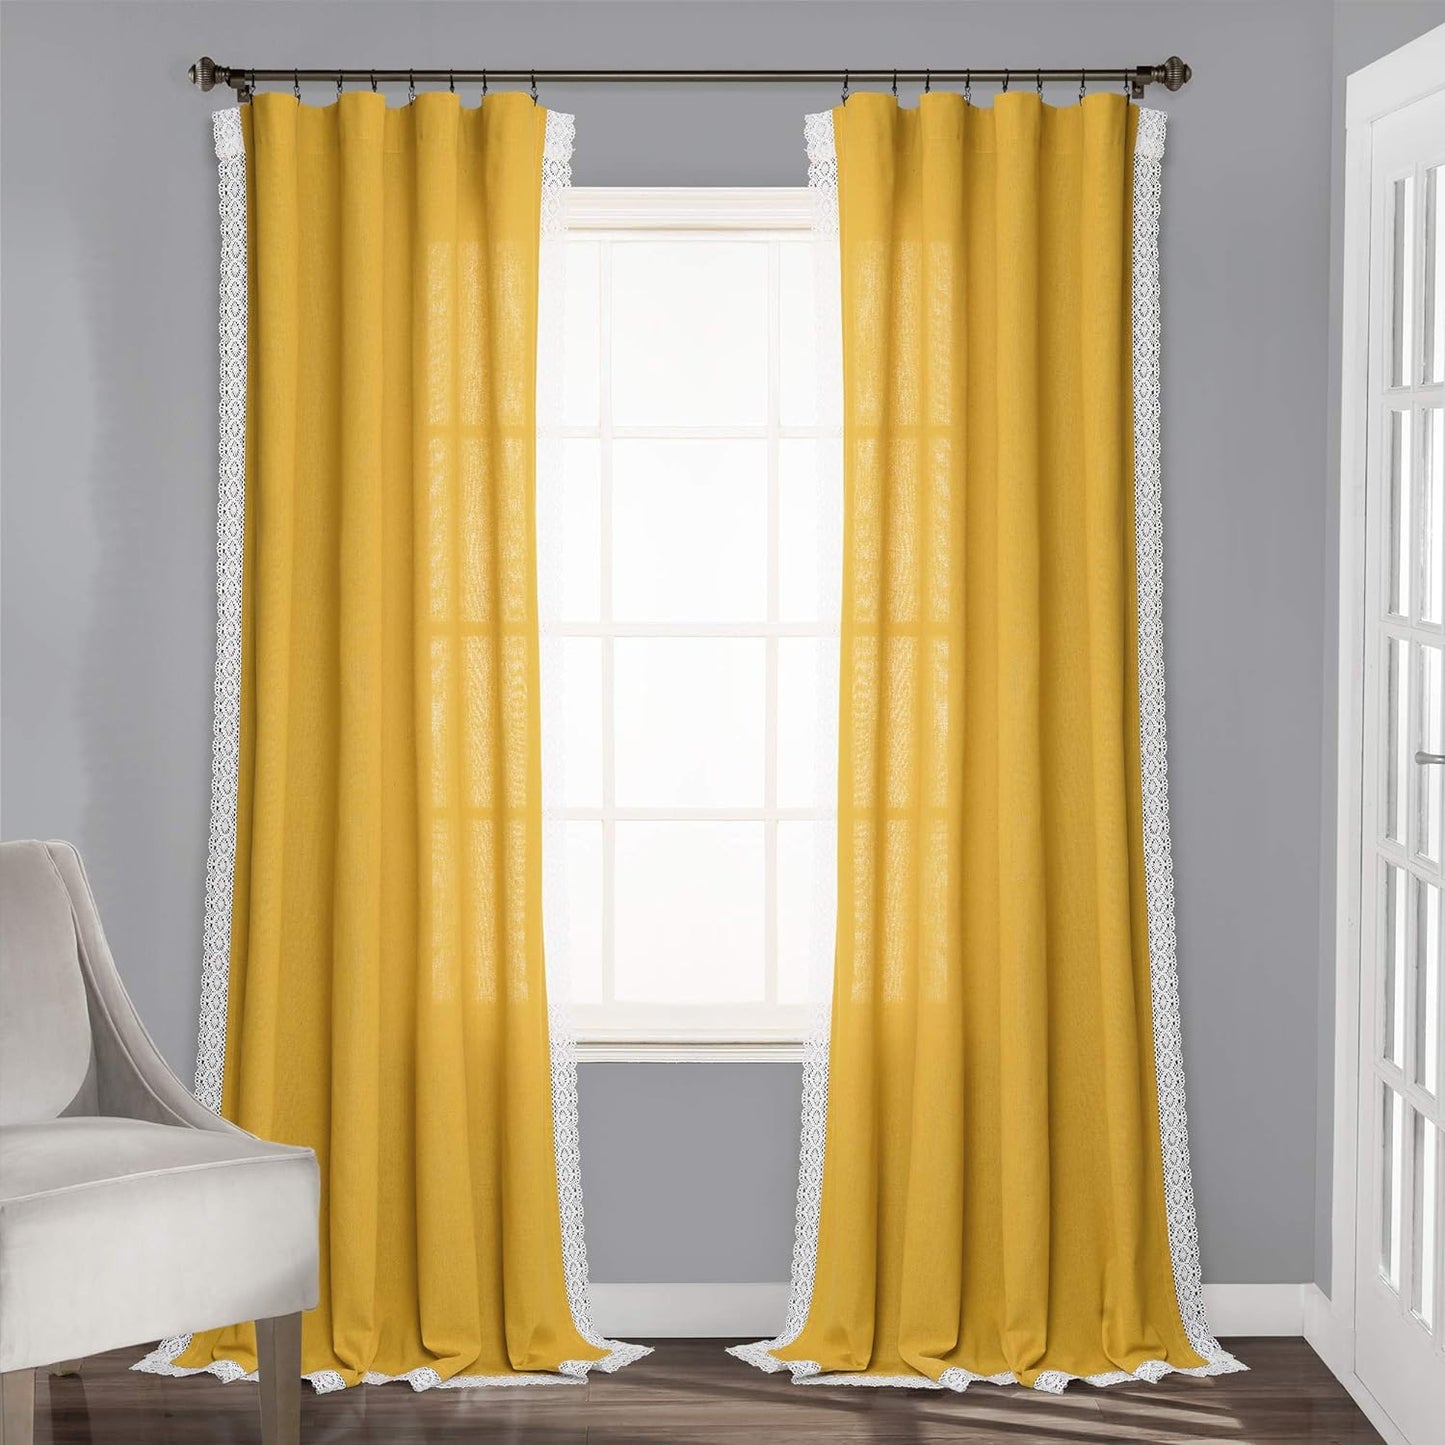 Lush Decor Rosalie Light Filtering Window Curtain Panel Set- Pair- Vintage Farmhouse & French Country Style Curtains - Timeless Dreamy Drape - Romantic Lace Trim - 54" W X 84" L, White  Triangle Home Fashions Yellow Window Panel 54"W X 95"L